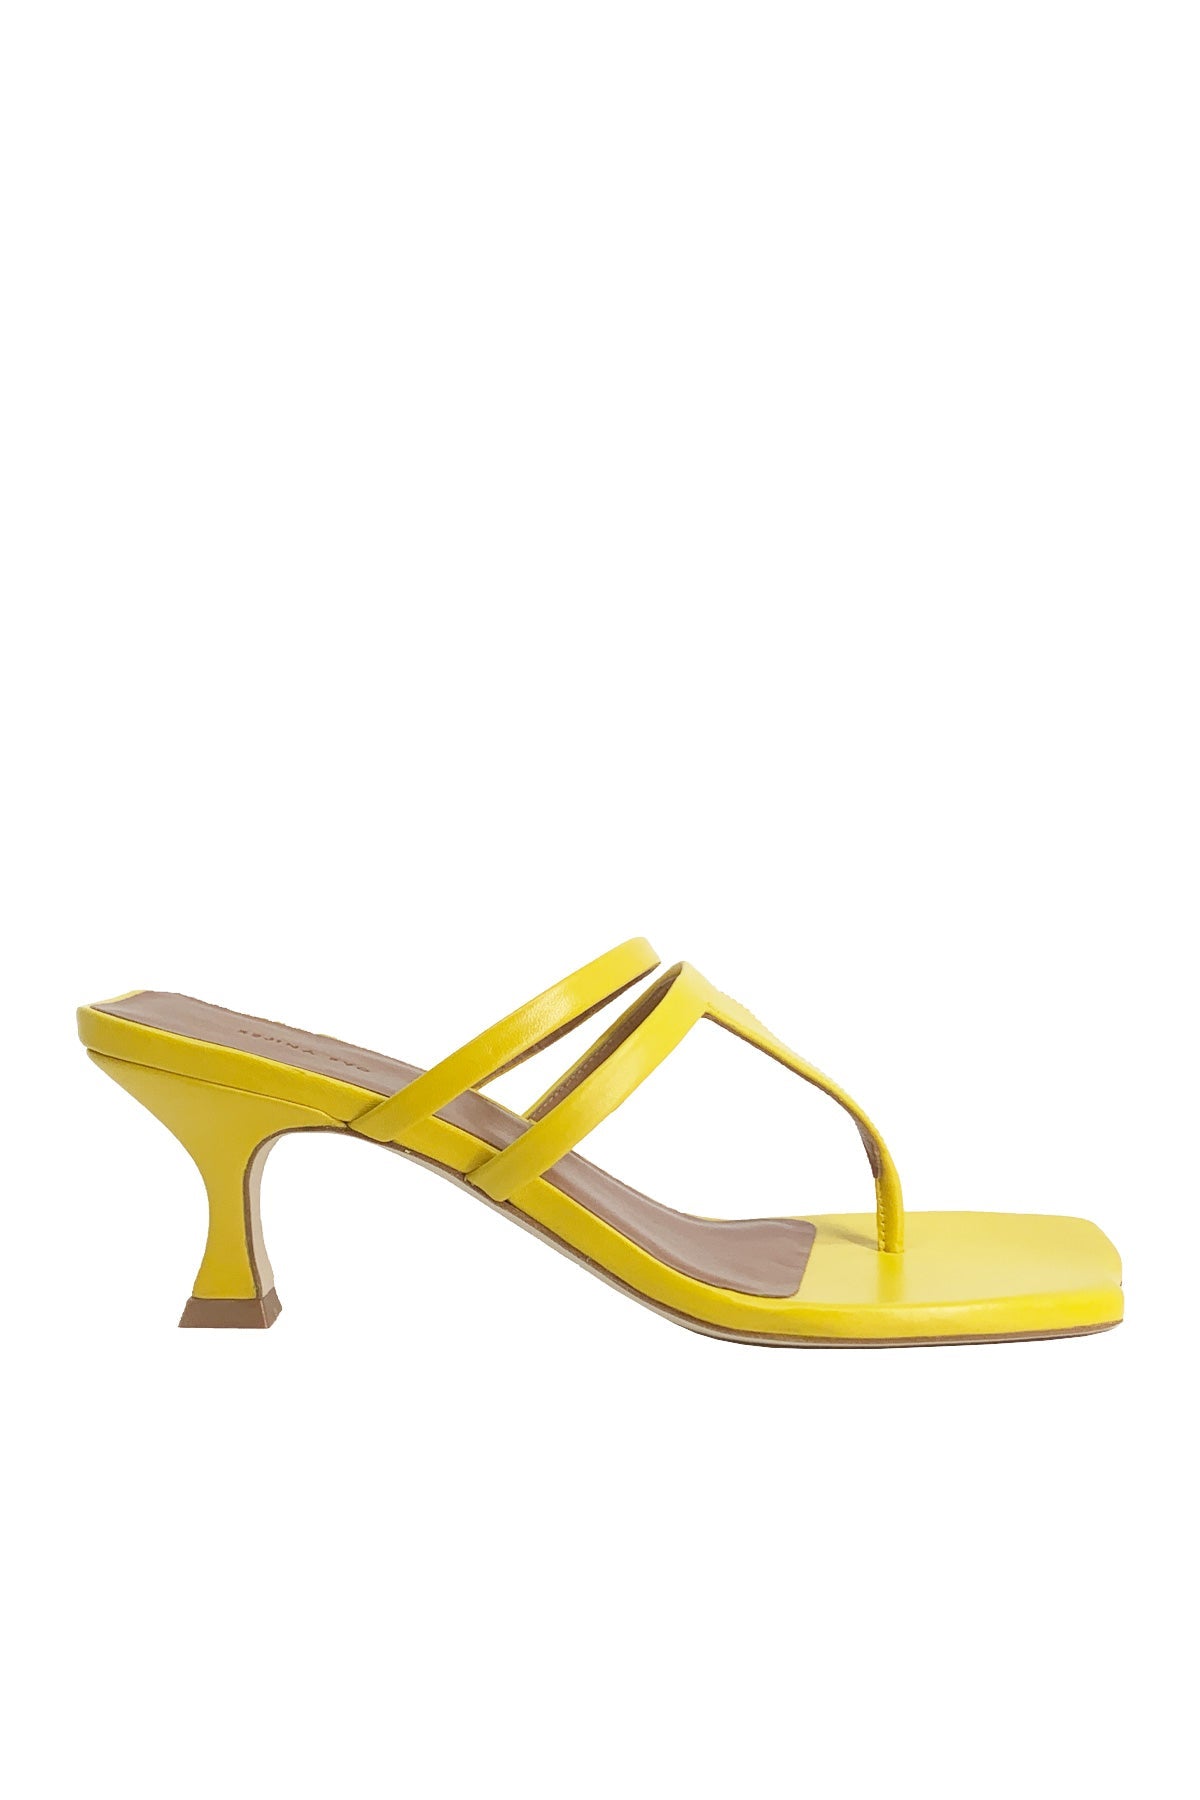 Allie Sandals in Yellow - shop-olivia.com